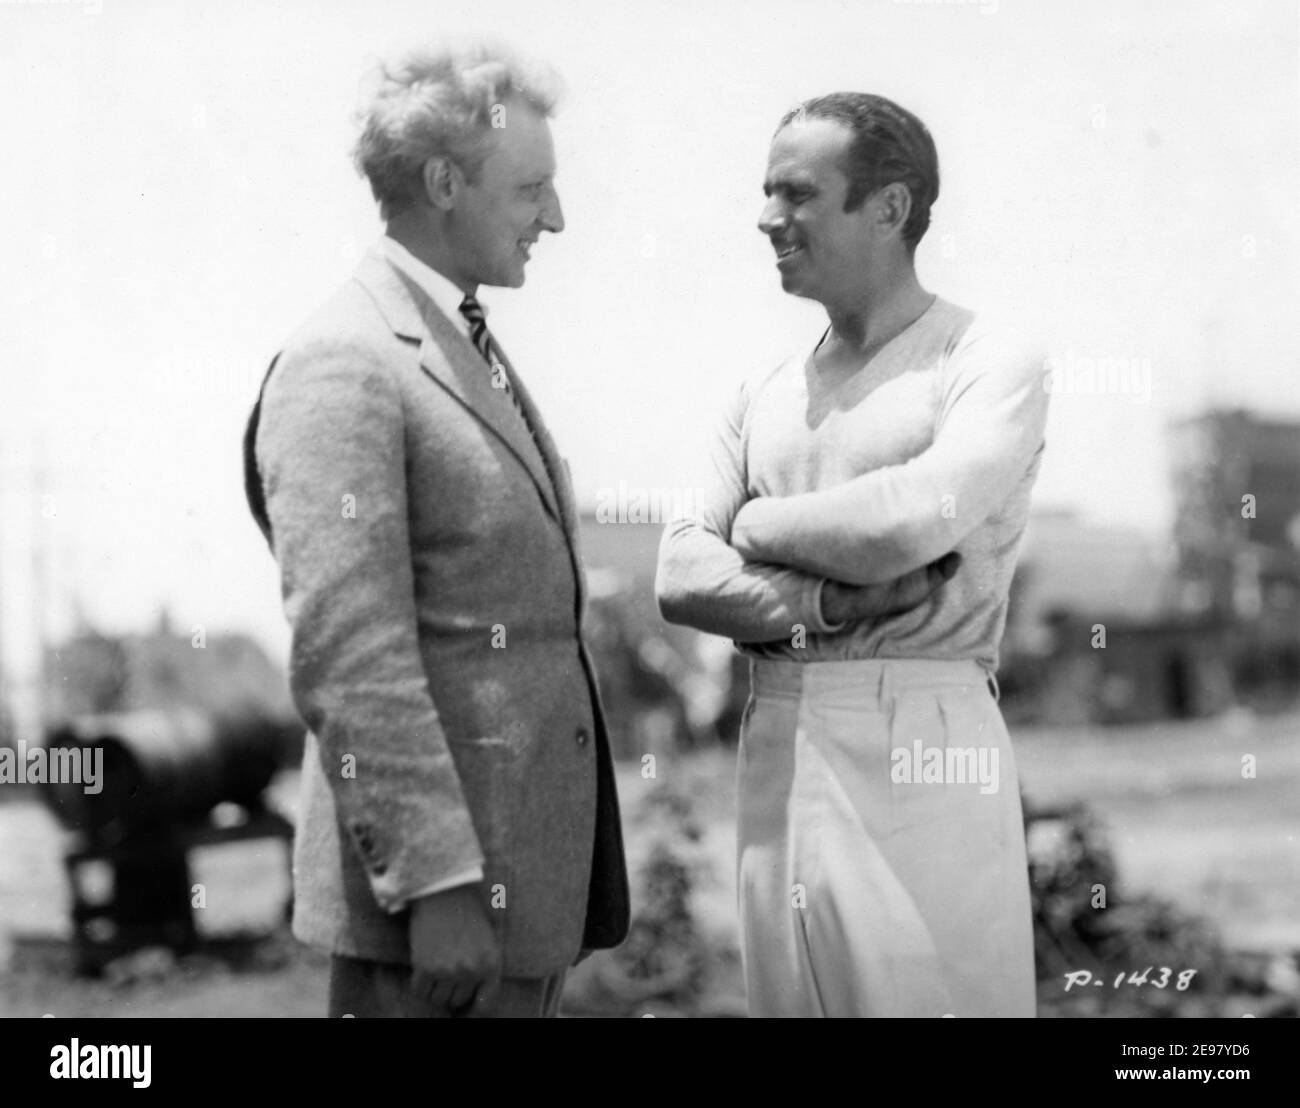 Visitor LEOPOLD STOKOWSKI ( conductor of the Philadelphia Symphony Orchestra ) with DOUGLAS FAIRBANKS Sr on set candid during filming of THE GAUCHO 1927 director F. RICHARD JONES story Douglas Fairbanks ( as Elton Thomas) Elton Corporation / United Artists Stock Photo